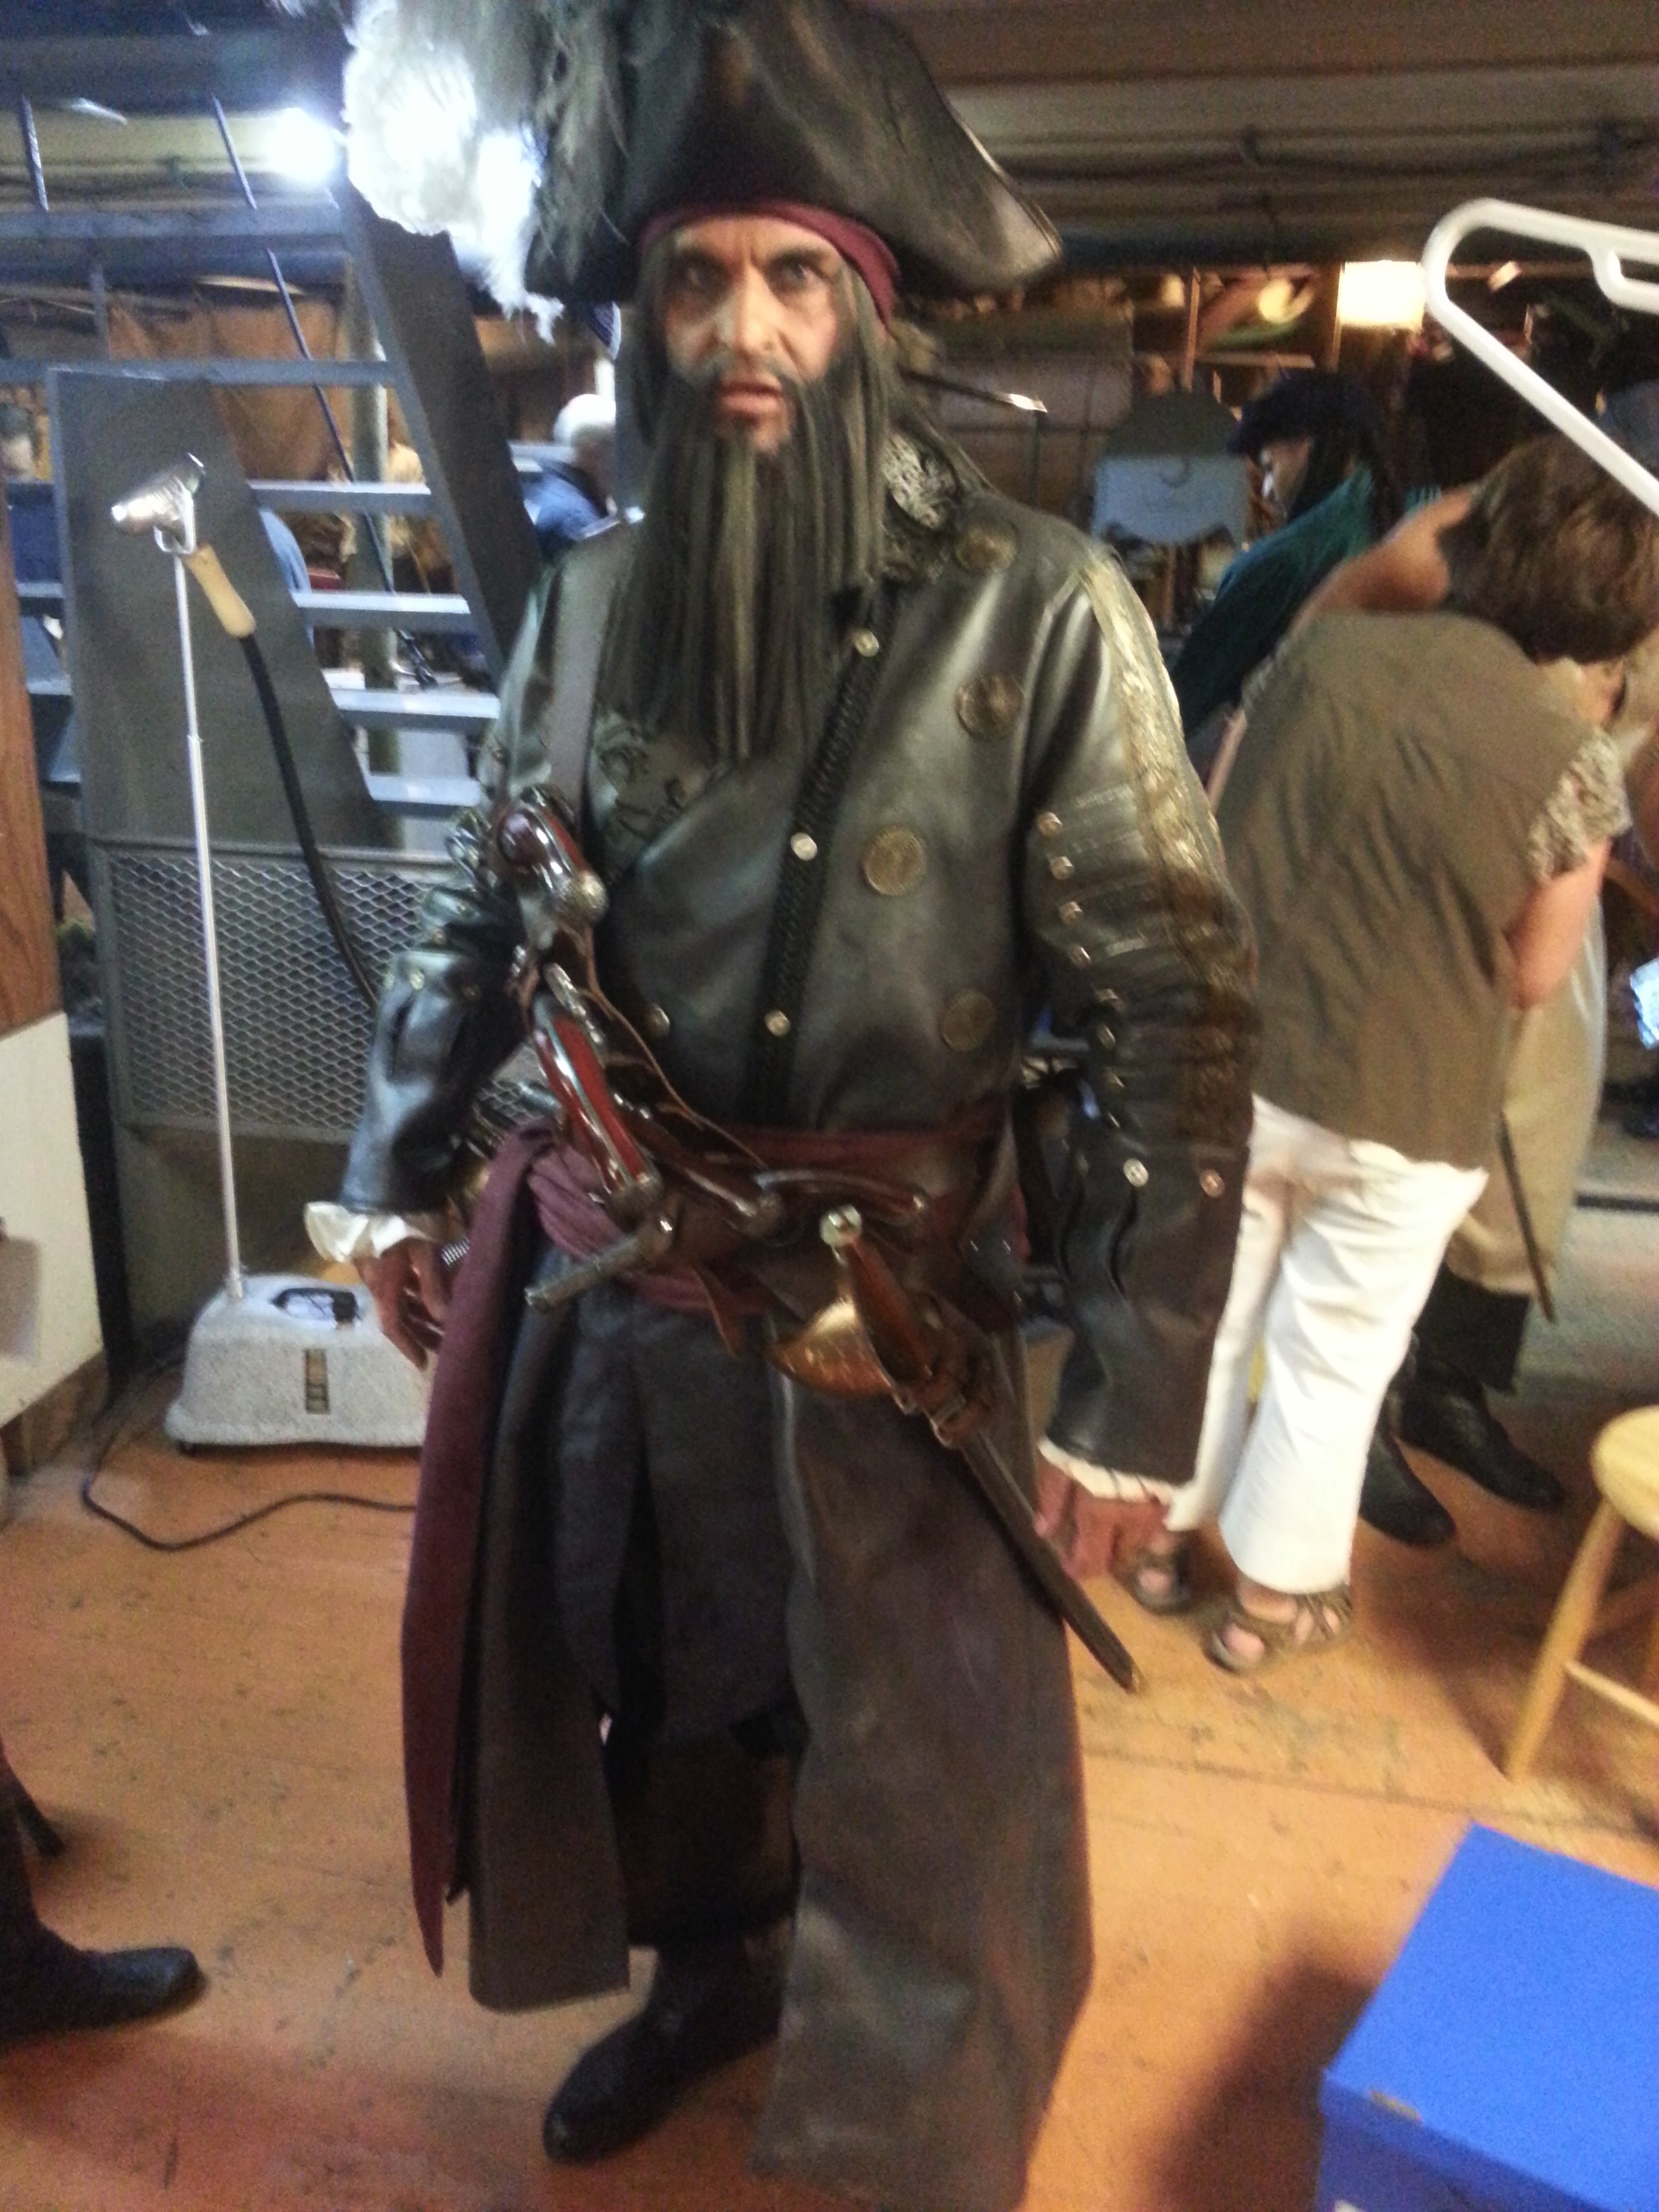 2013 Comic-Con Assassin's Creed 4-Blackflag promotion. George Dawe is ready for 